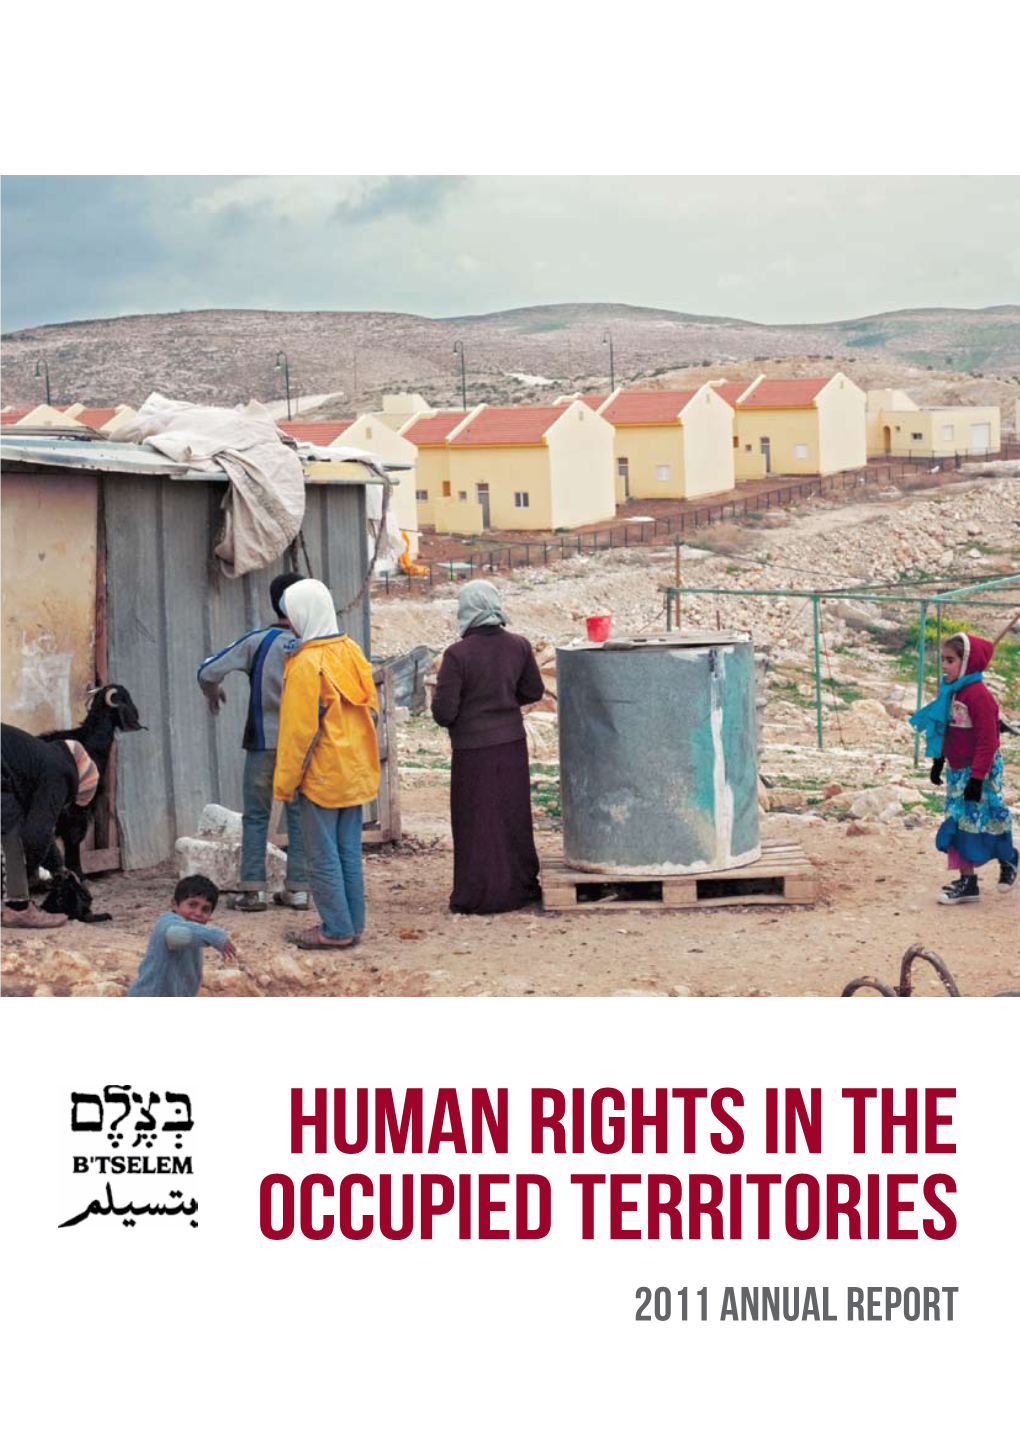 B'tselem, Human Rights in the Occupied Territories, Annual Report 2011, Hebrew